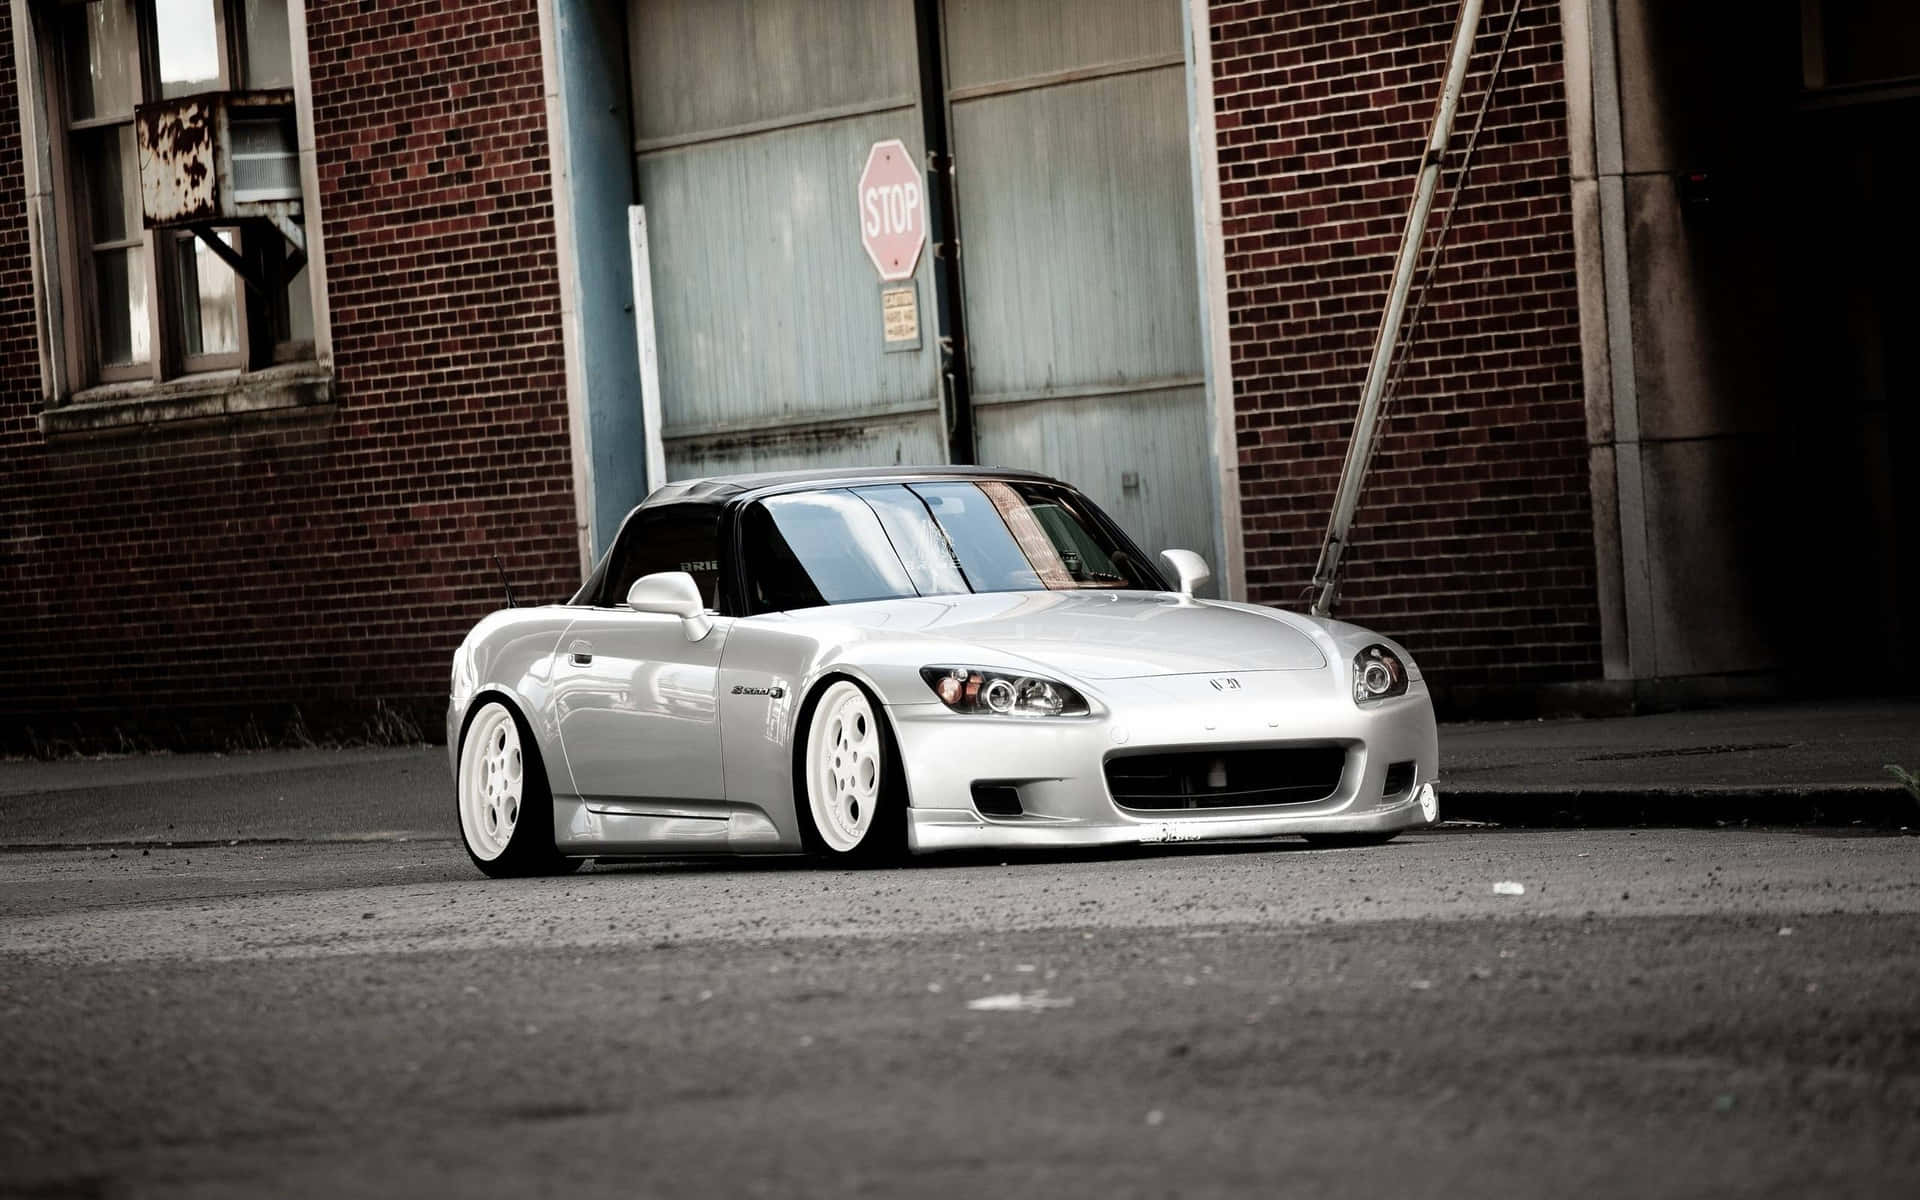 Sleek and Sporty Honda S2000 - An Iconic Roadster Wallpaper